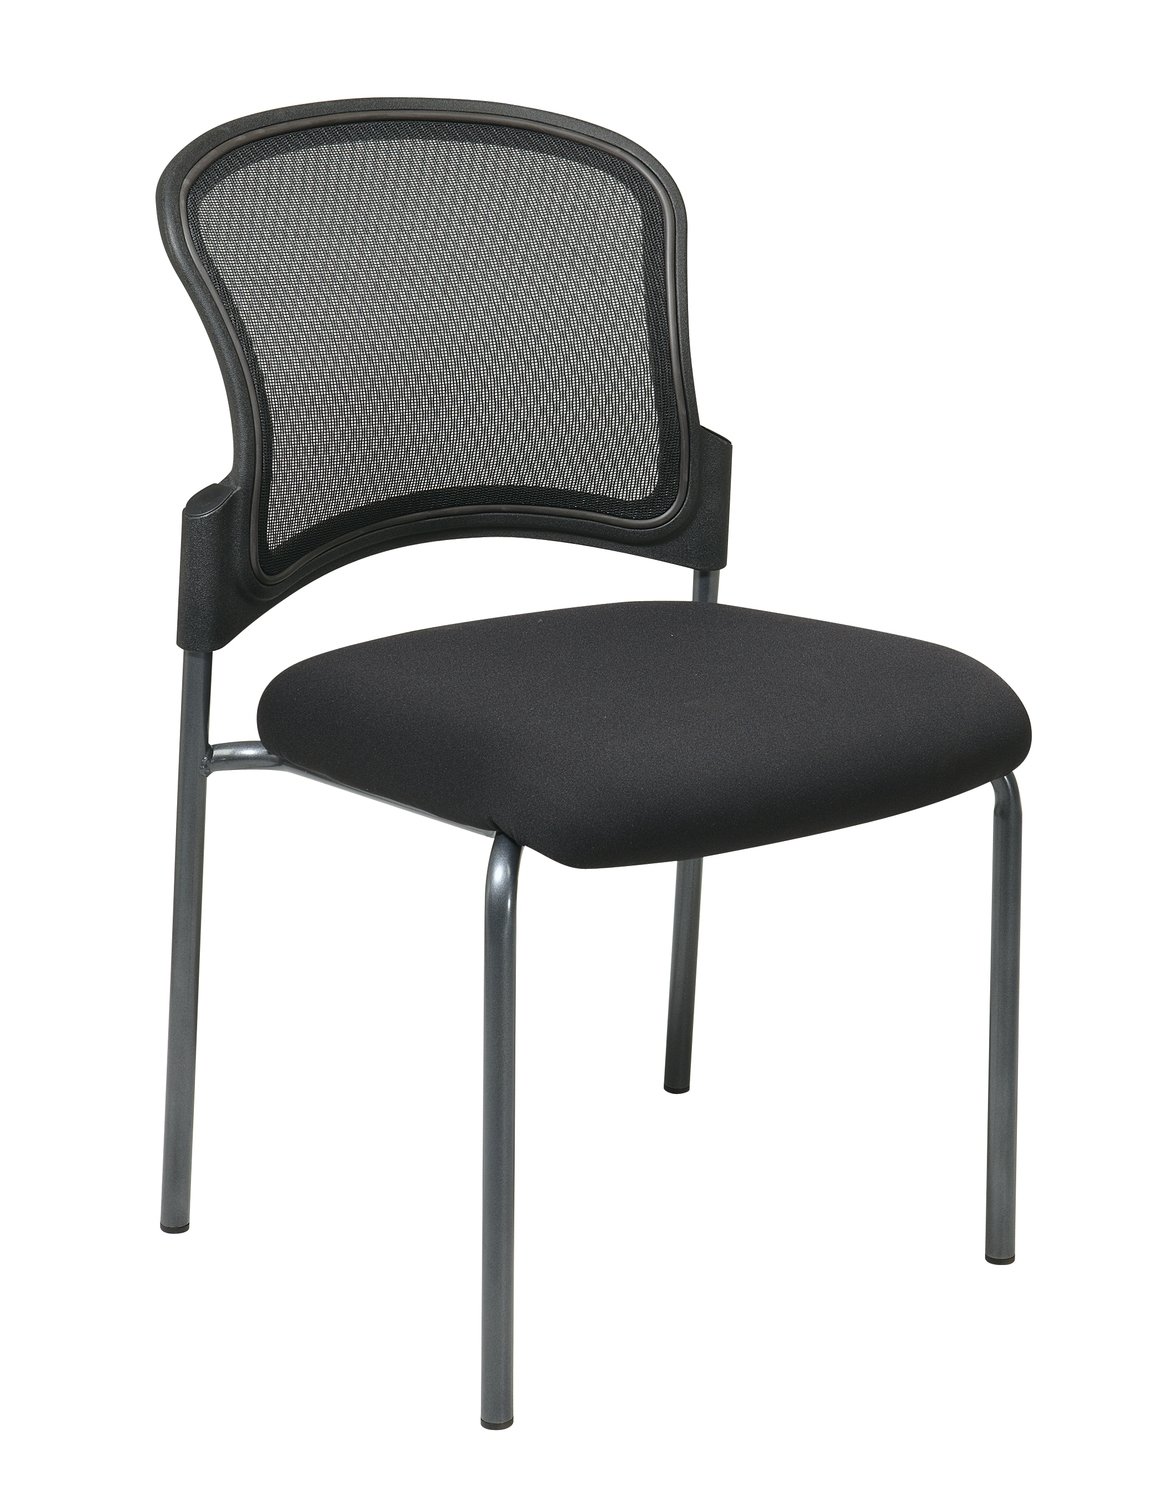 TITANIUM FINISH BLACK VISITORS CHAIR WITH PROGRID® BACK AND STRAIGHT LEGS